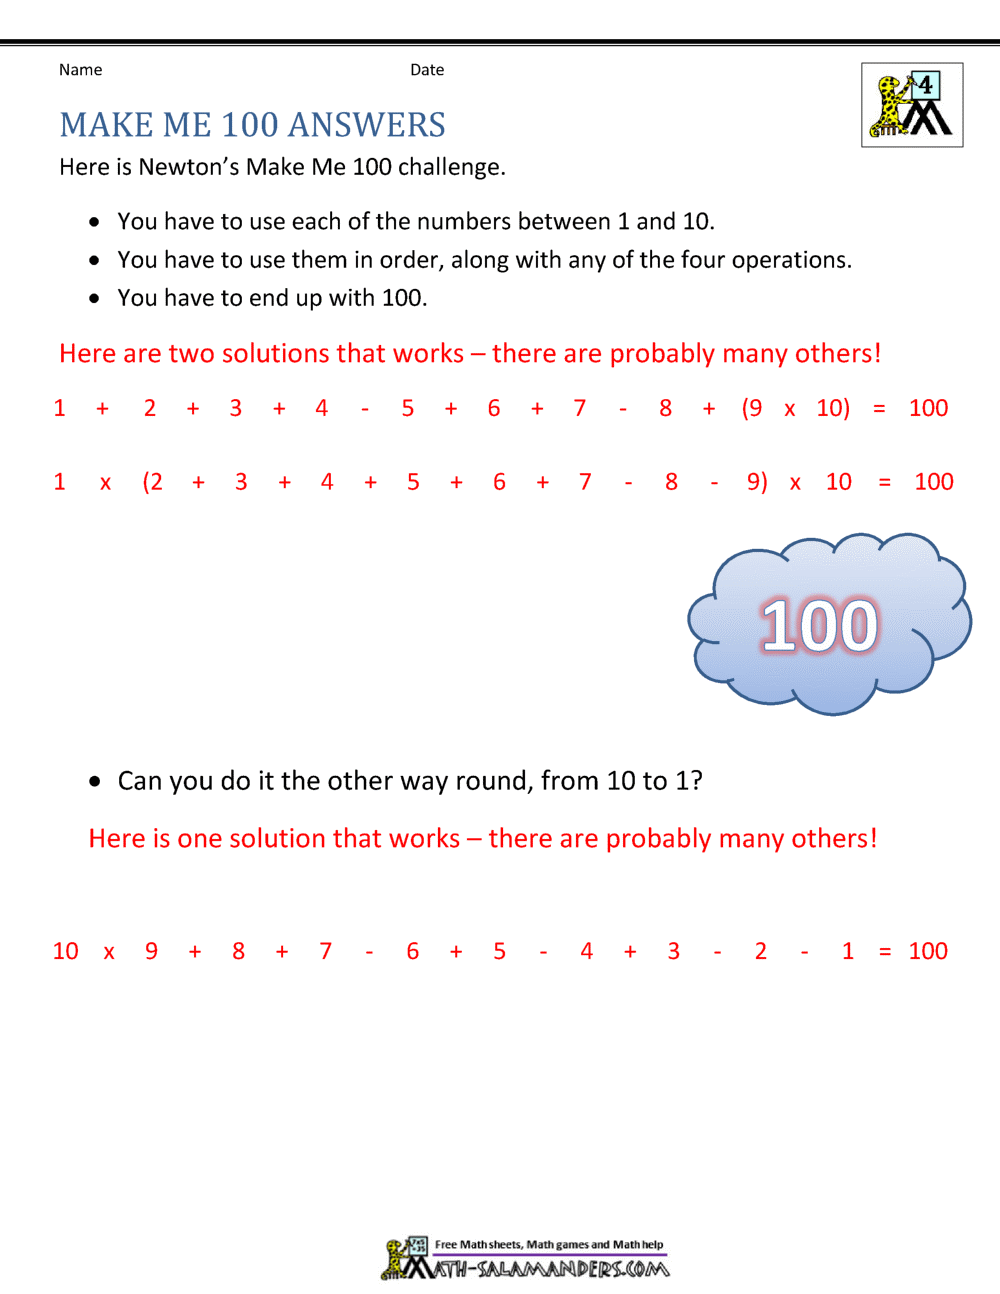 worksheet 4th Grade Multiplication Word Problems 4th grade math problems fourth word make me 100 answers